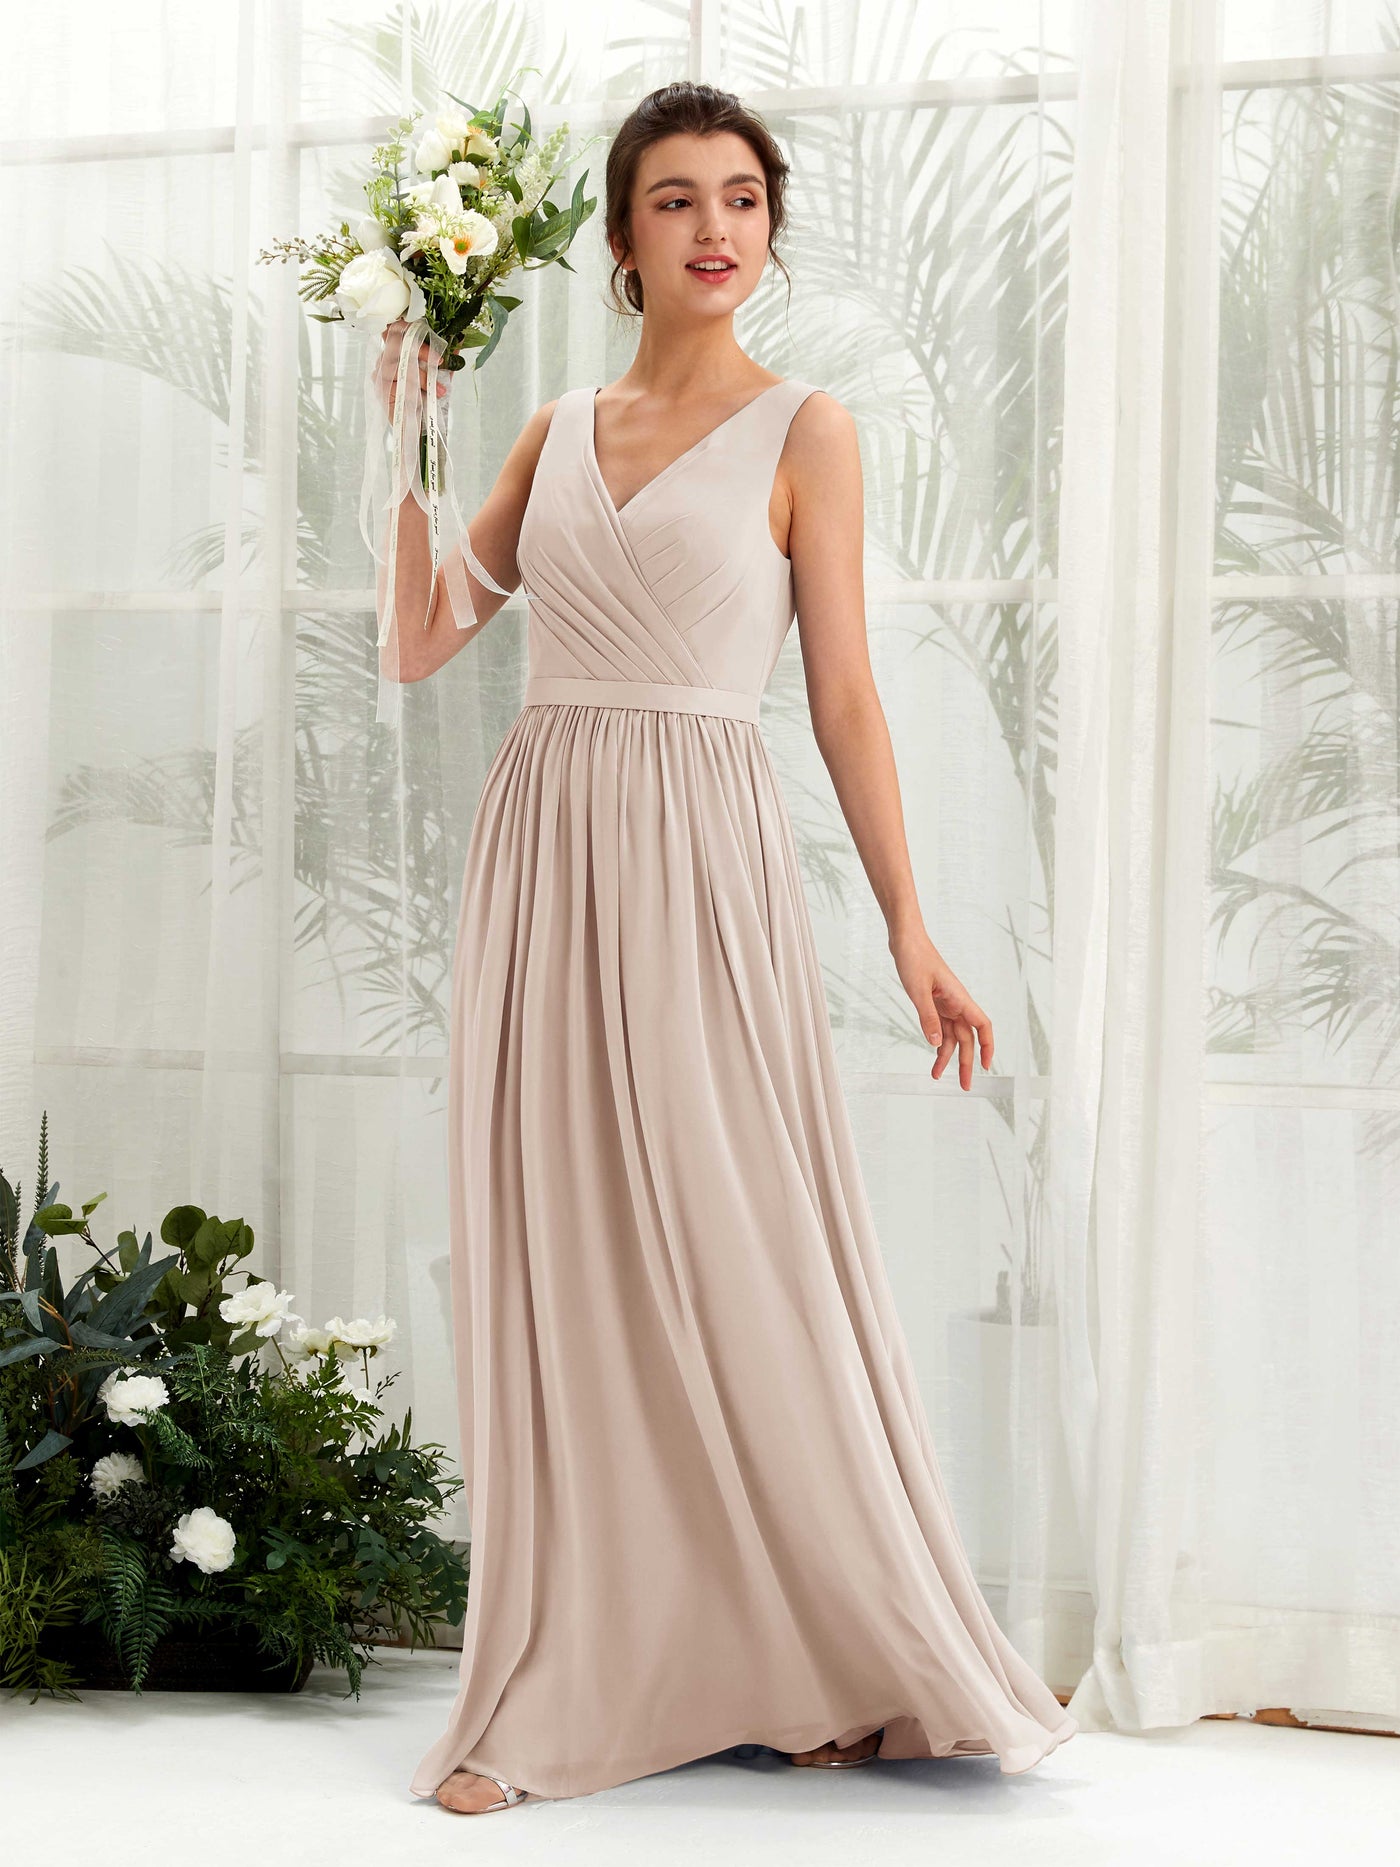 Champagne Bridesmaid Dresses Bridesmaid Dress A-line Chiffon V-neck Full Length Sleeveless Wedding Party Dress (81223616)#color_champagne